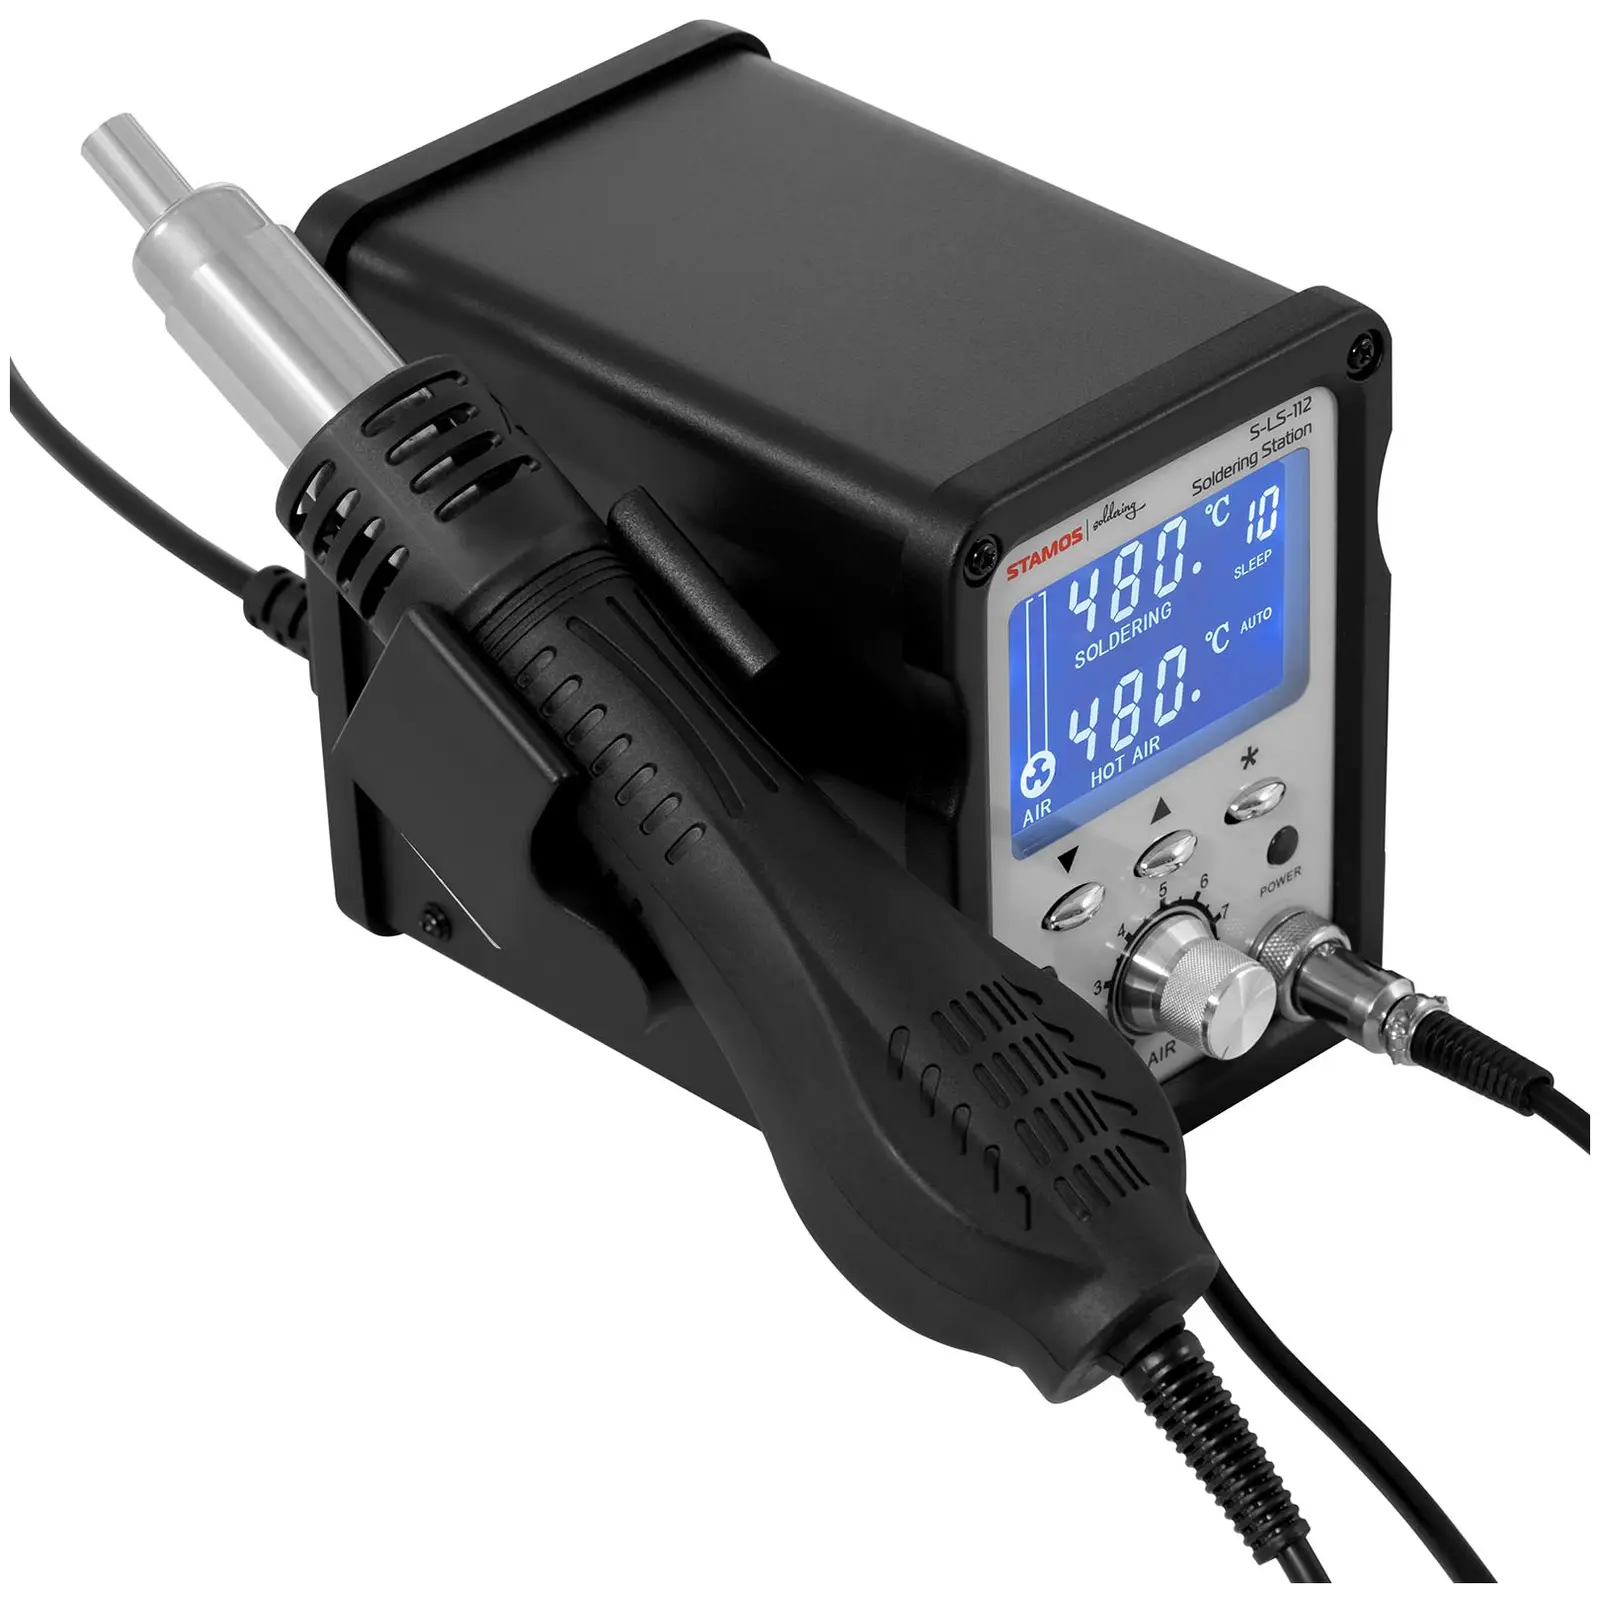 Soldering Station - SMD Rework Station - LCD - with 102 W Soldering Iron and 750 W Hot Air Iron